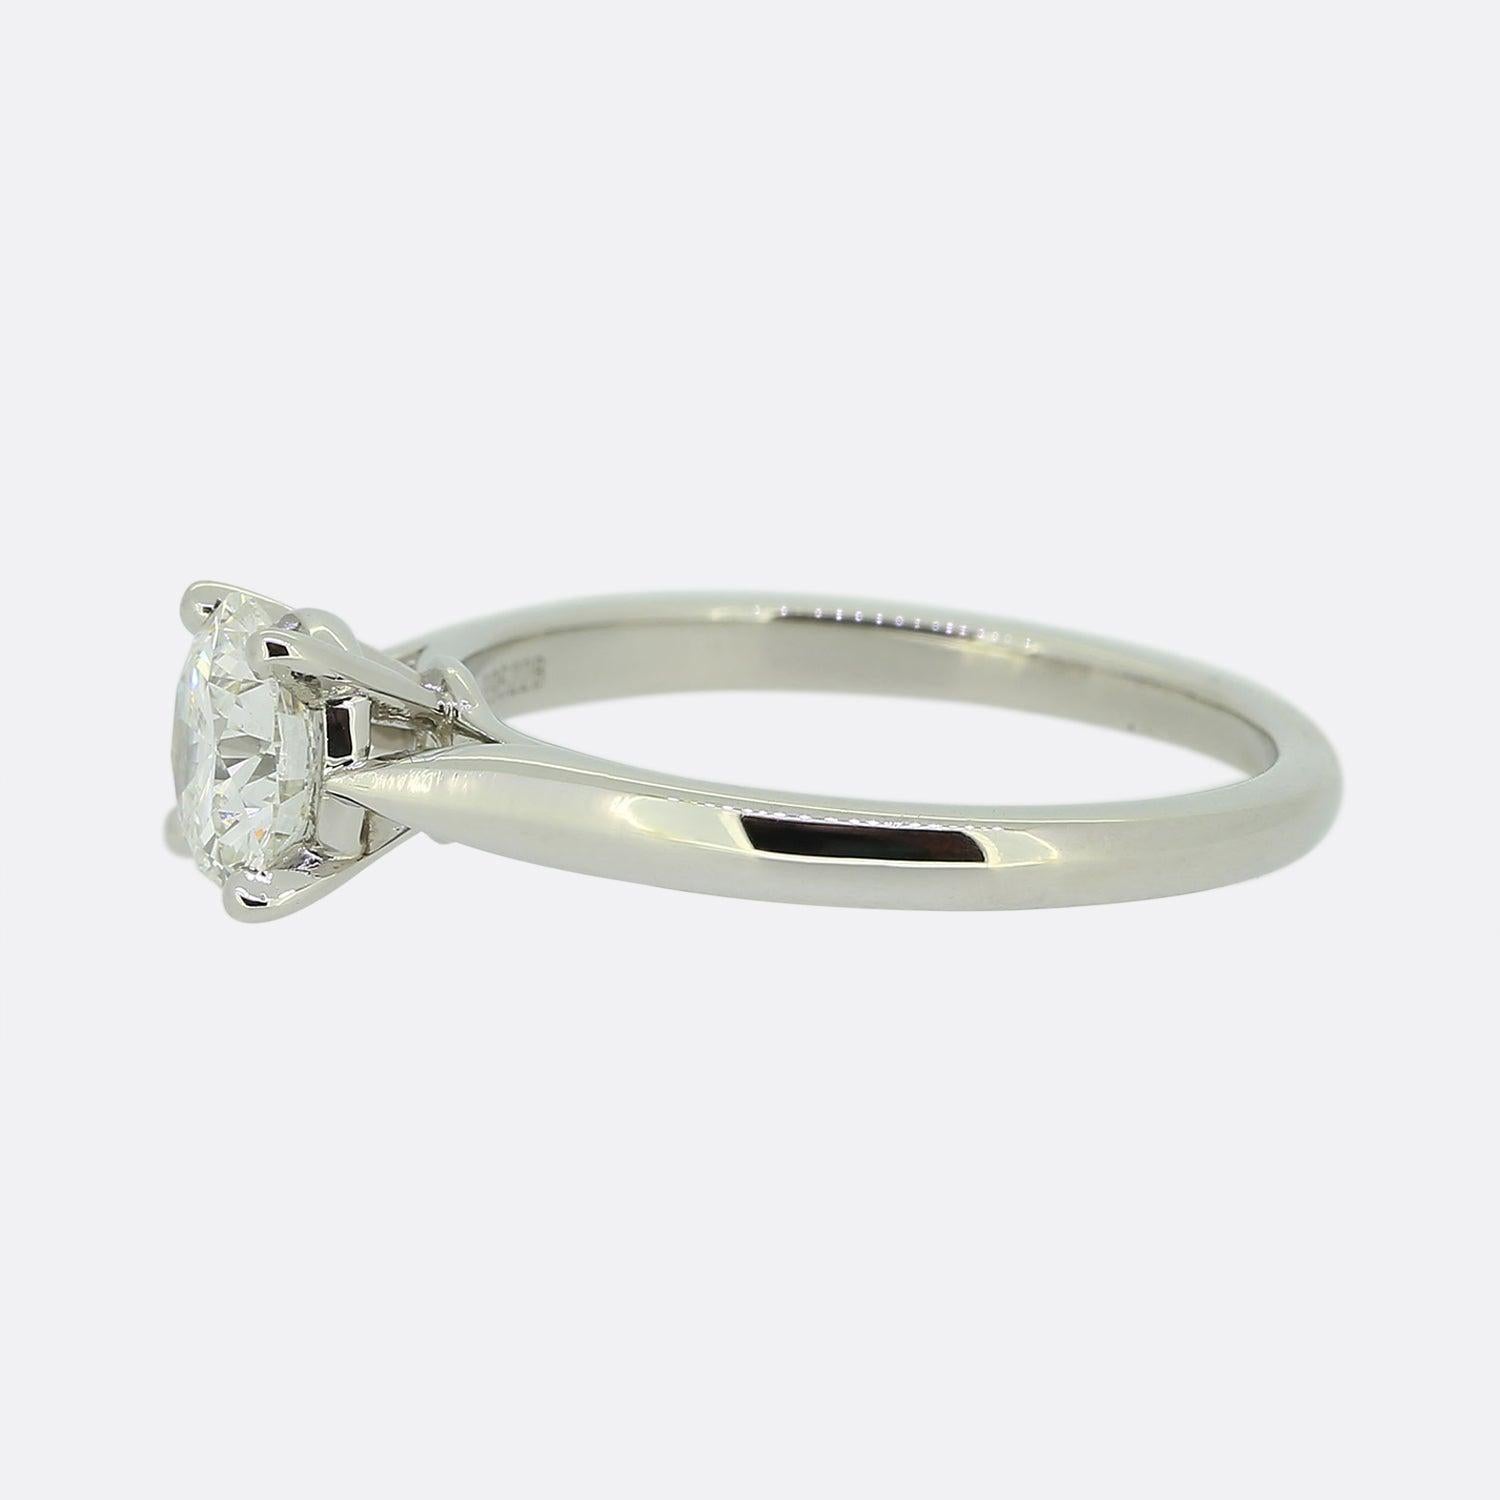 Here we have a classic diamond solitaire engagement ring from the world renowned jewellery house of Cartier. A sensational 1.02ct round brilliant cut diamond sits alone and proud in a four clawed setting atop a plain polished platinum